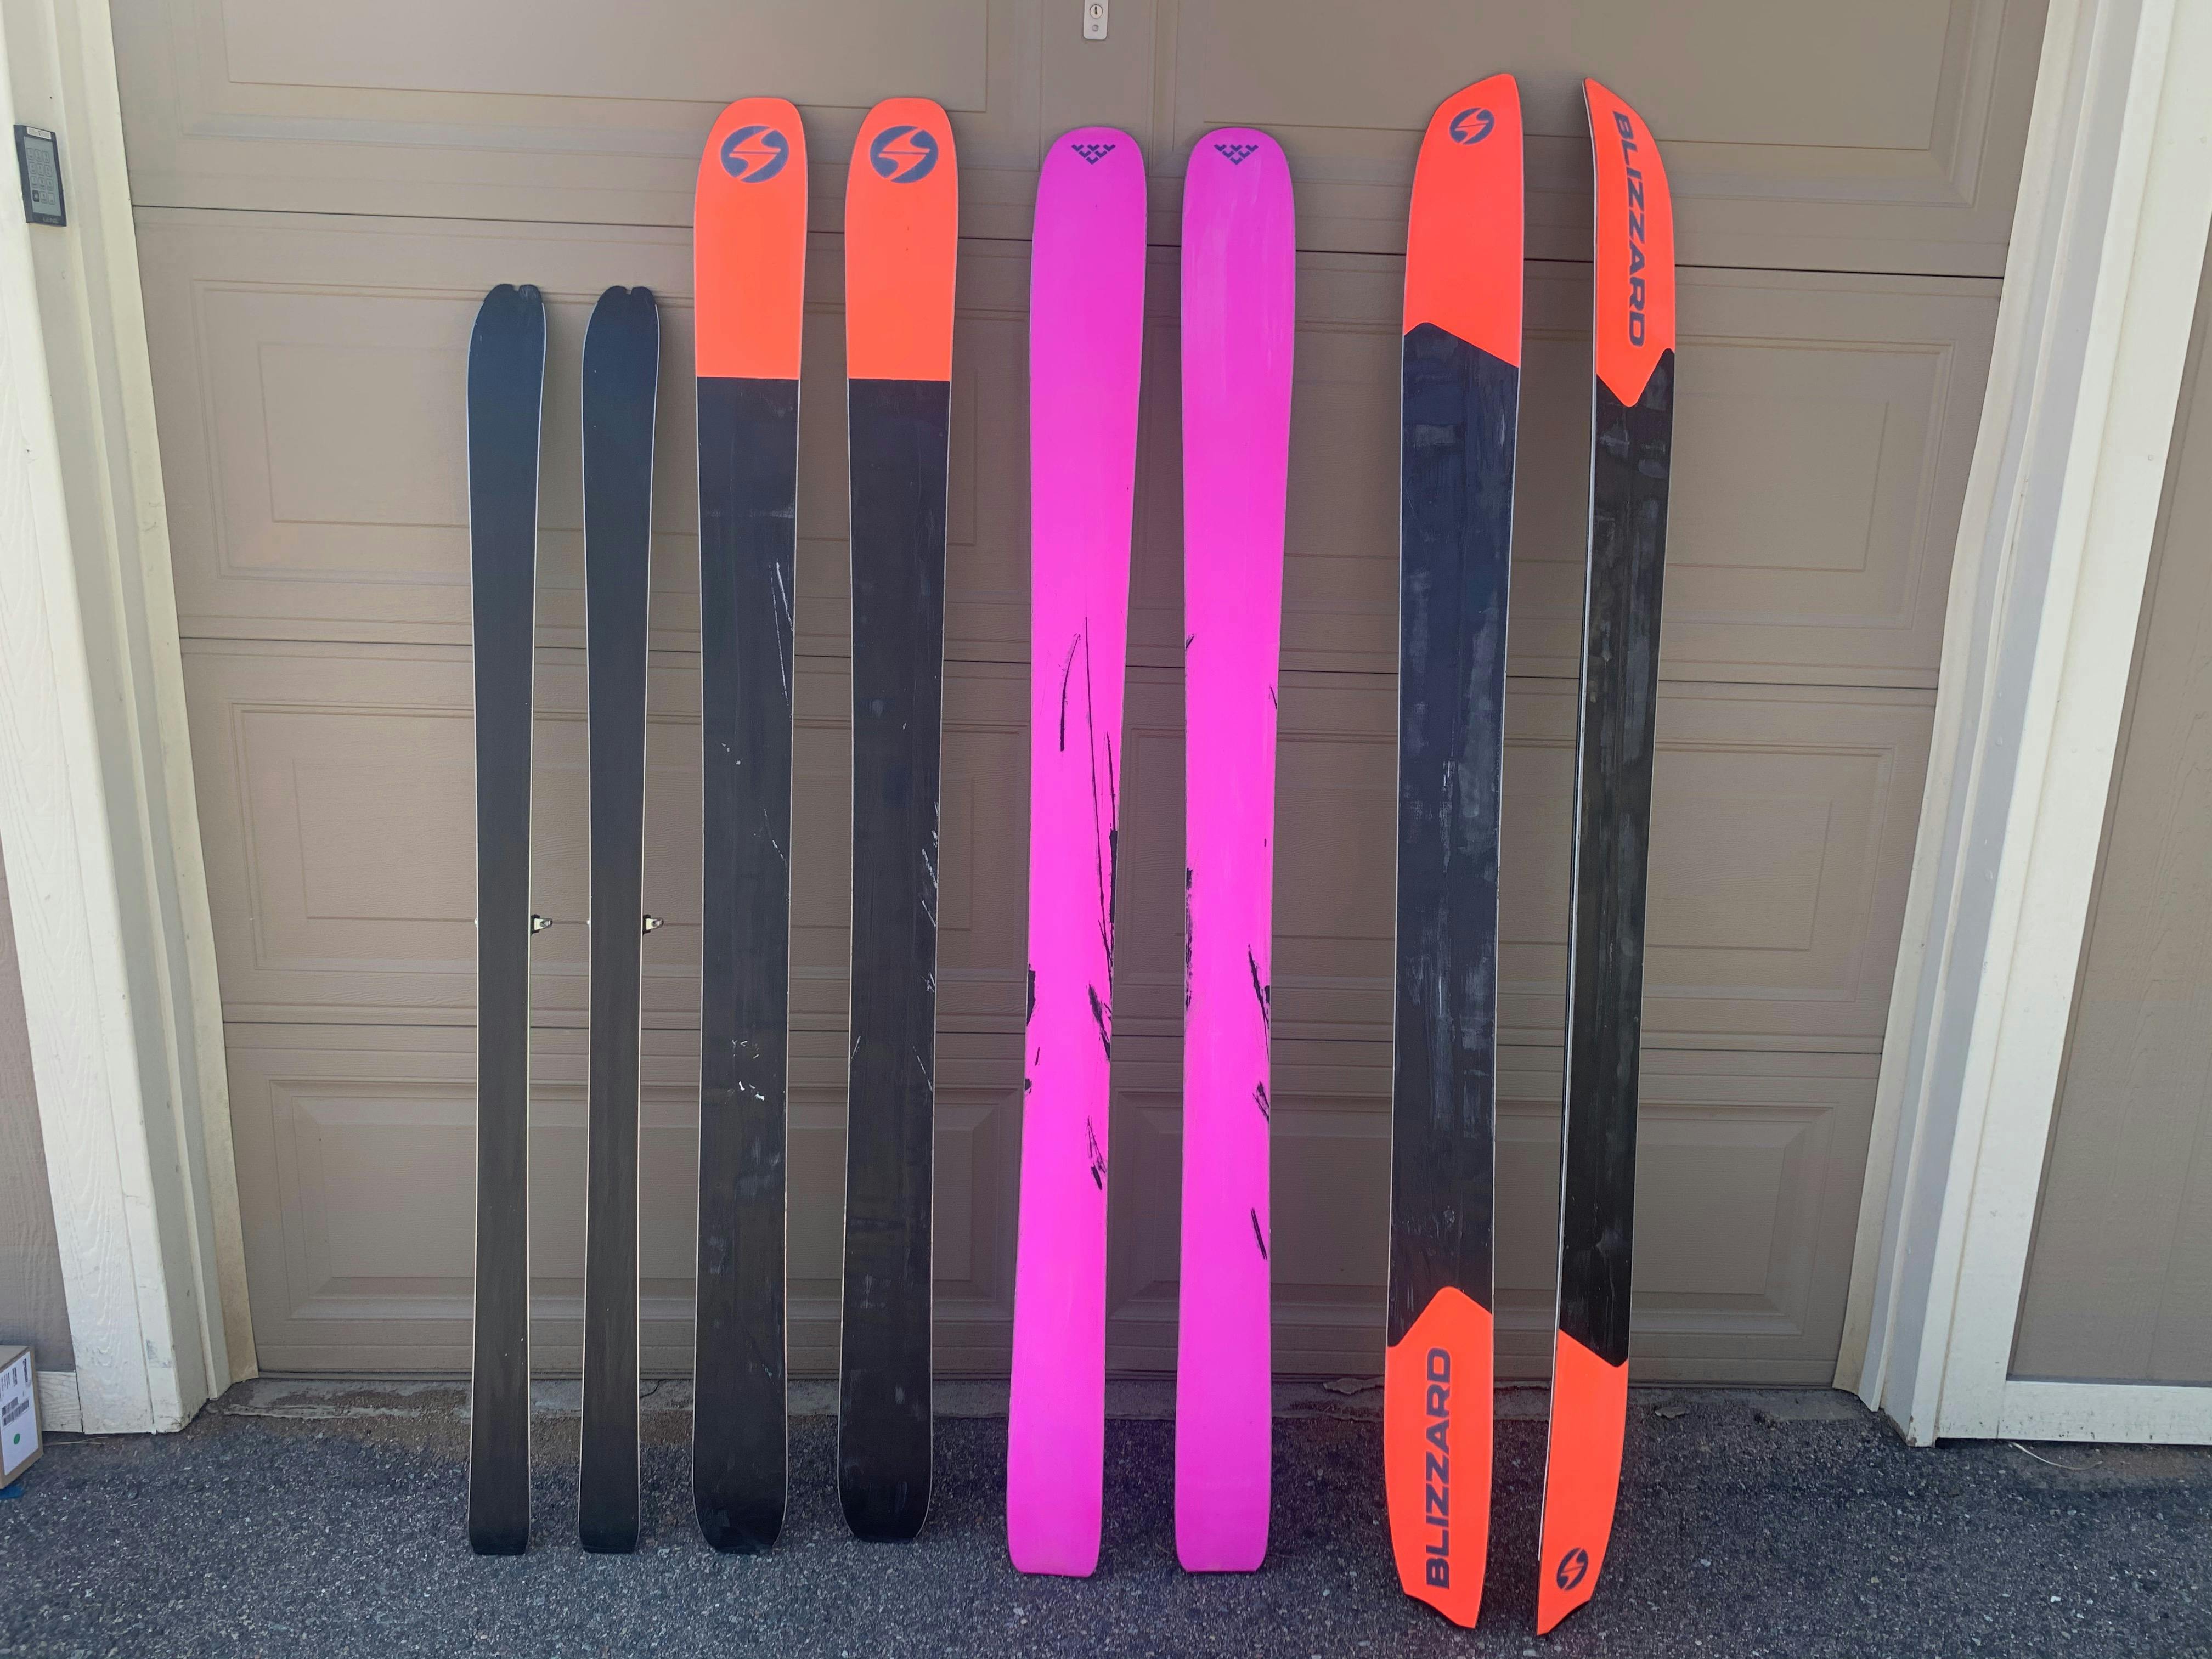 Four pairs of used skis leaning against a garage door